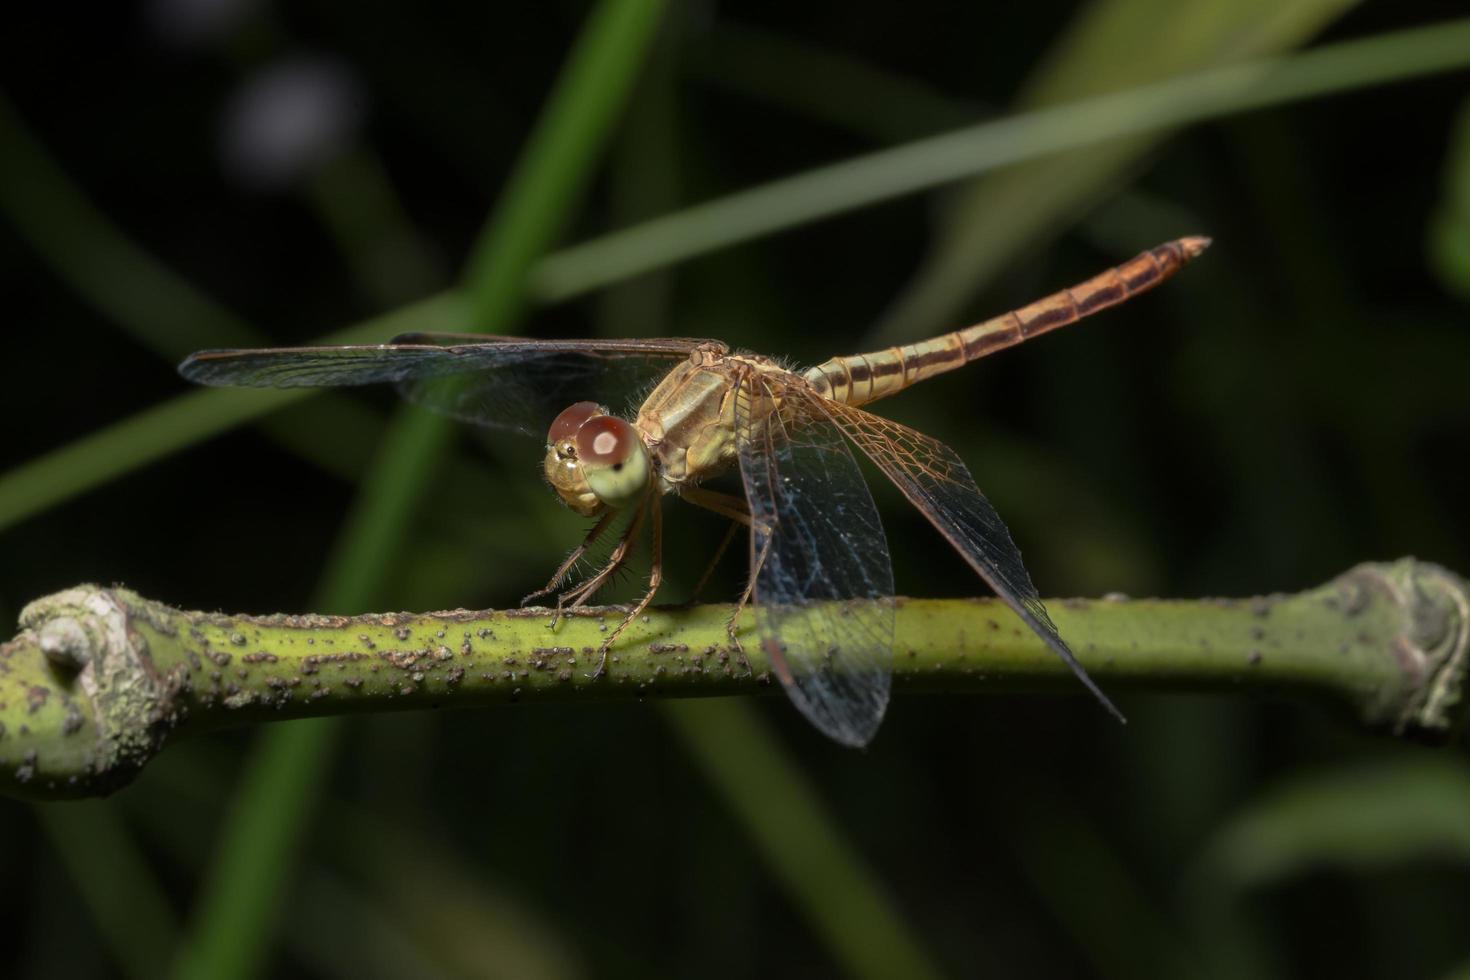 Close-up of a dragonfly photo